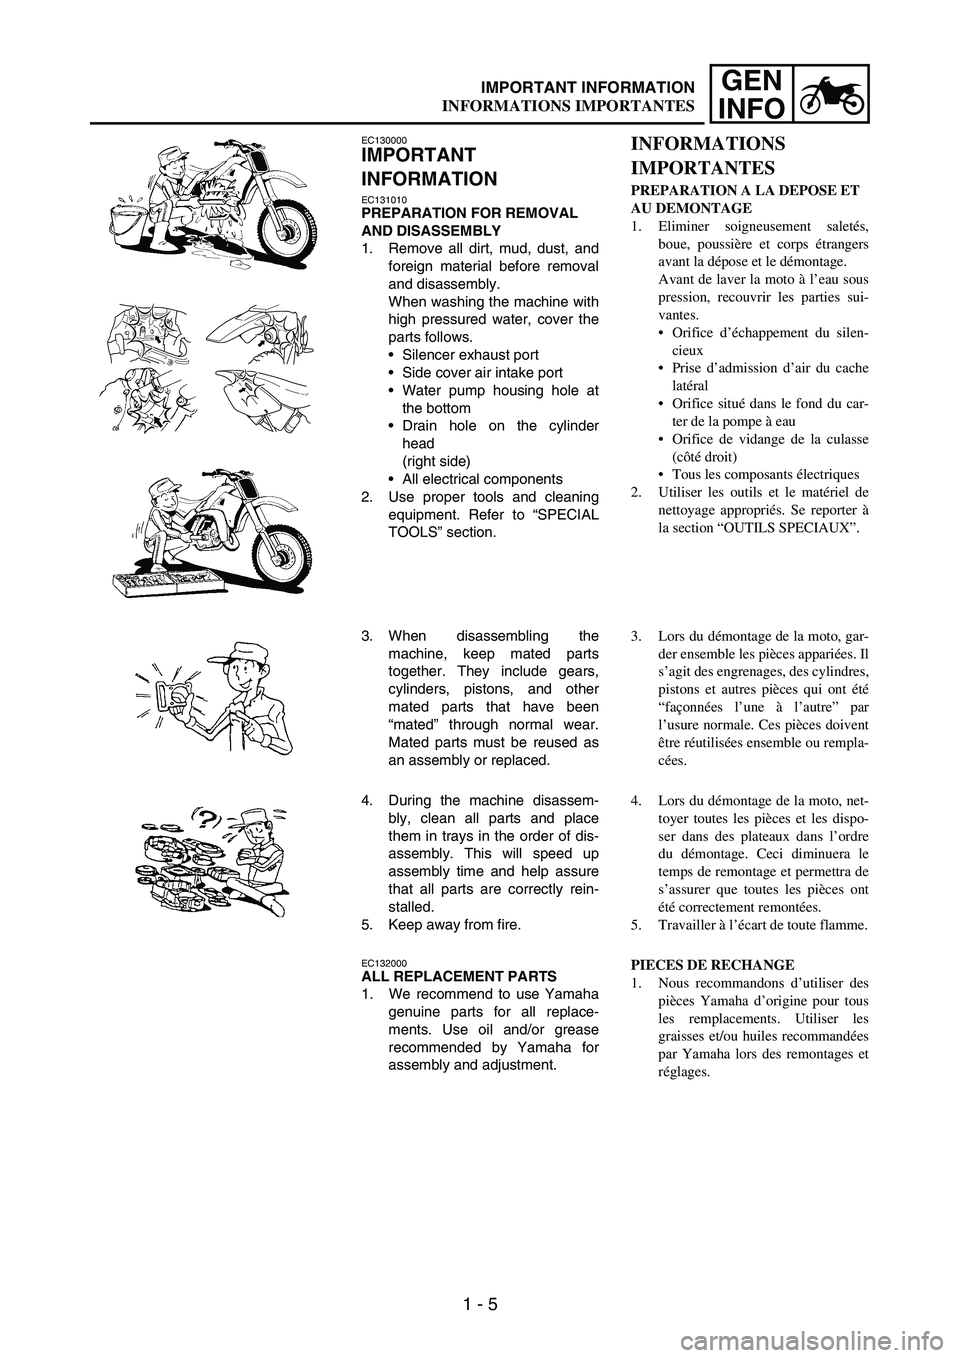 YAMAHA WR 250F 2006  Notices Demploi (in French) 1 - 5
GEN
INFOIMPORTANT INFORMATION
EC130000
IMPORTANT 
INFORMATION
EC131010PREPARATION FOR REMOVAL 
AND DISASSEMBLY
1. Remove all dirt, mud, dust, and
foreign material before removal
and disassembly.